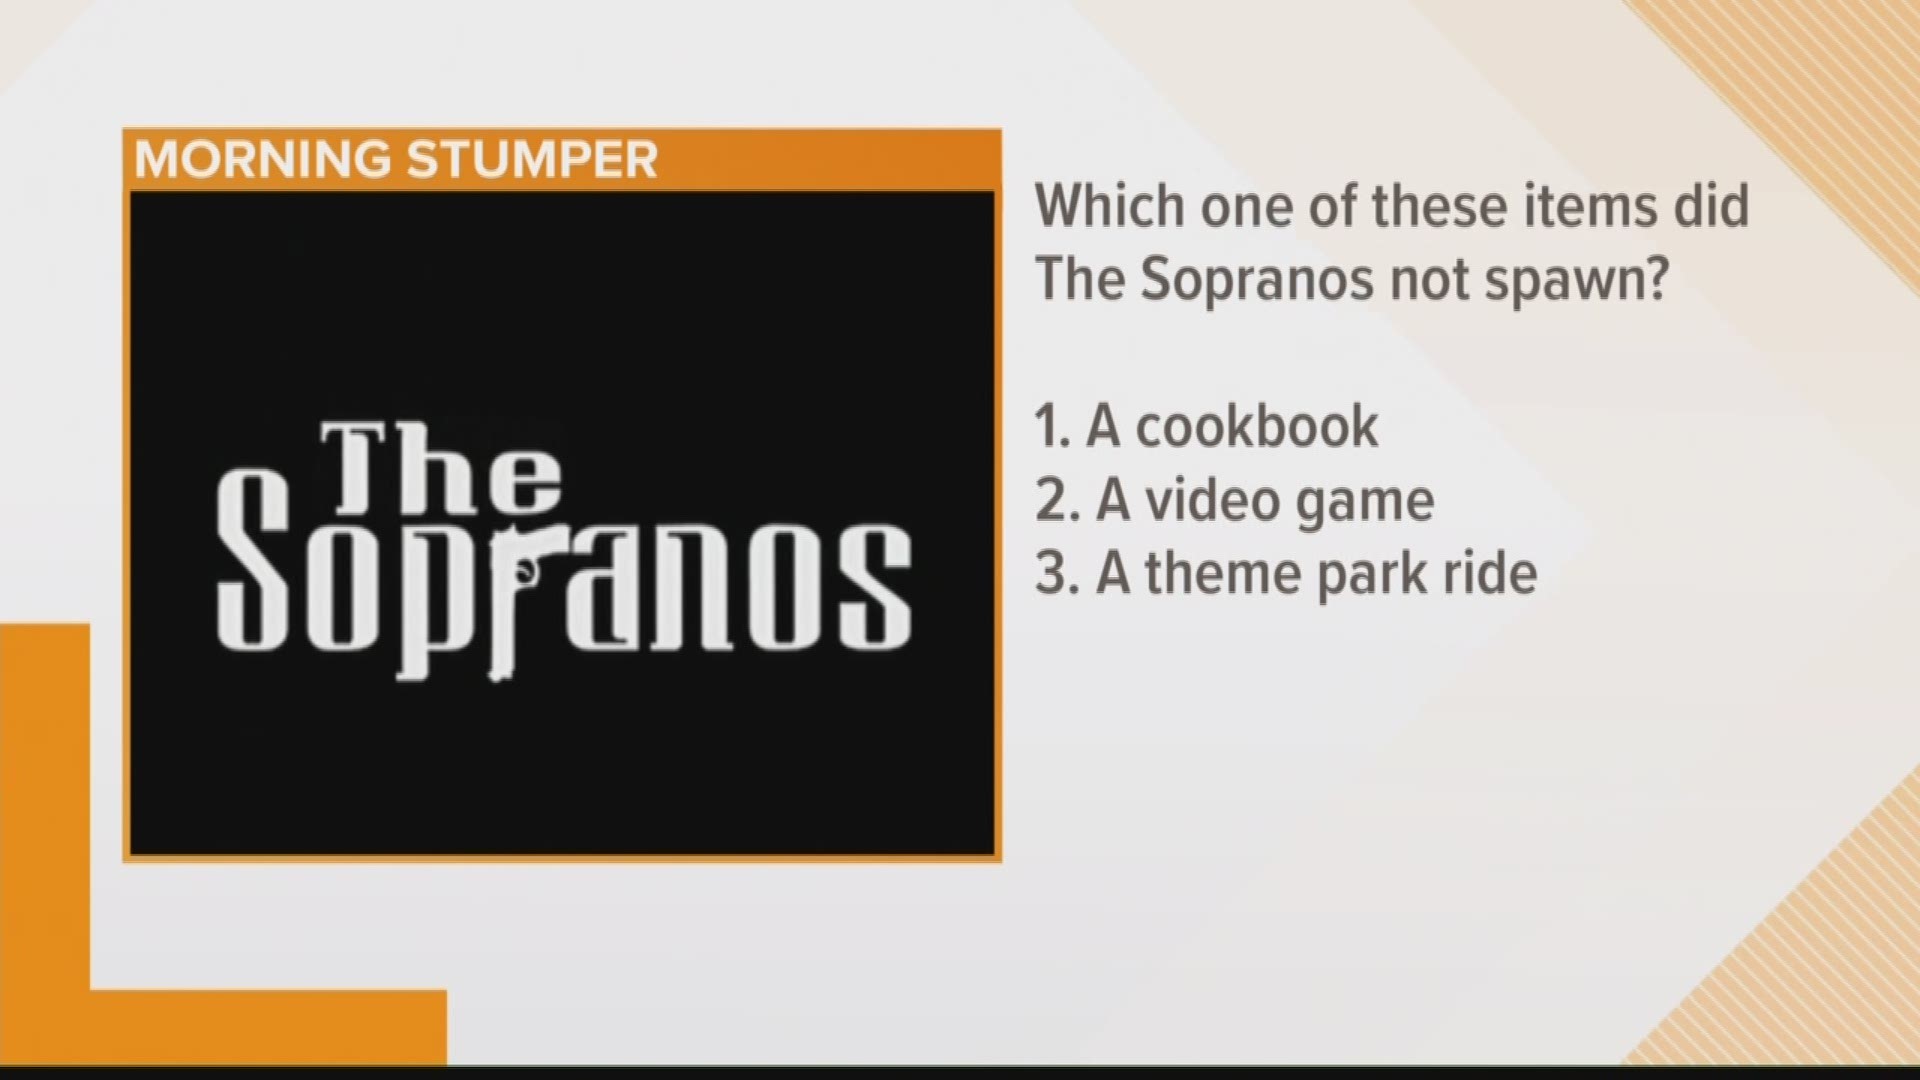 For today's stumper we asked, which one of these items did "The Sopranos" not spawn?